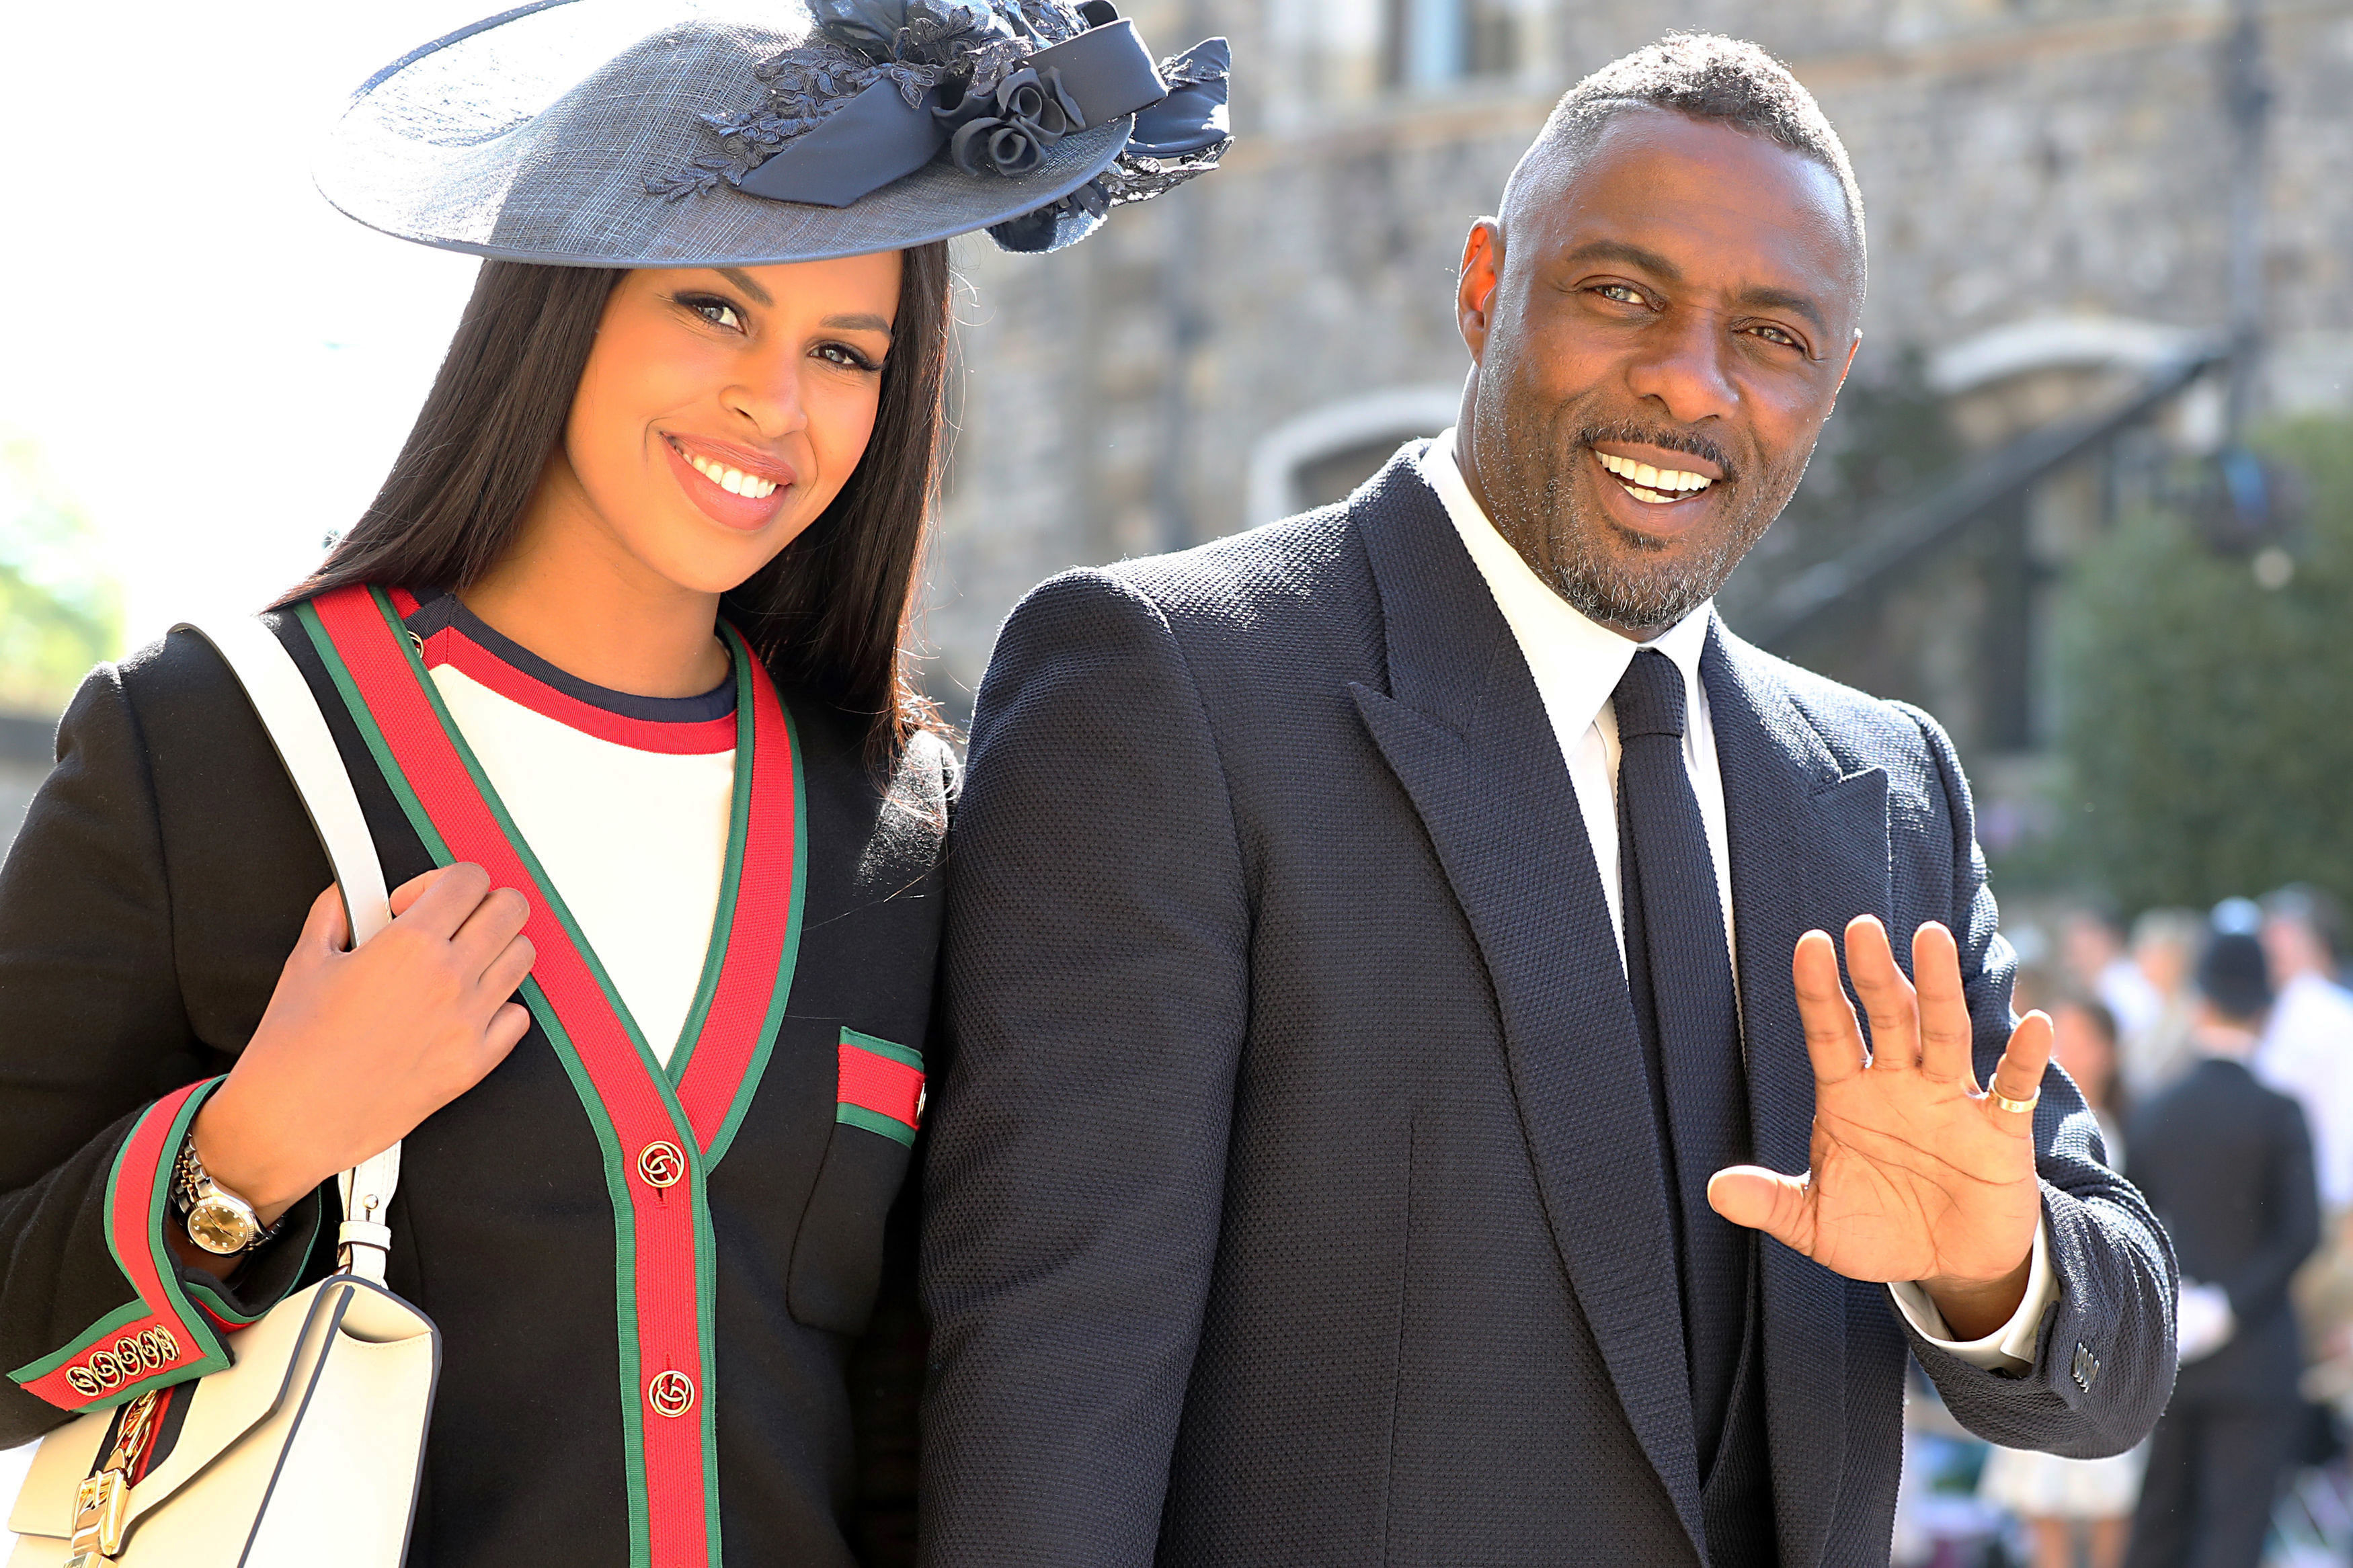 Sabrina Dhowre Elba in hat and striped outfit and Idris in suit, both smiling and waving